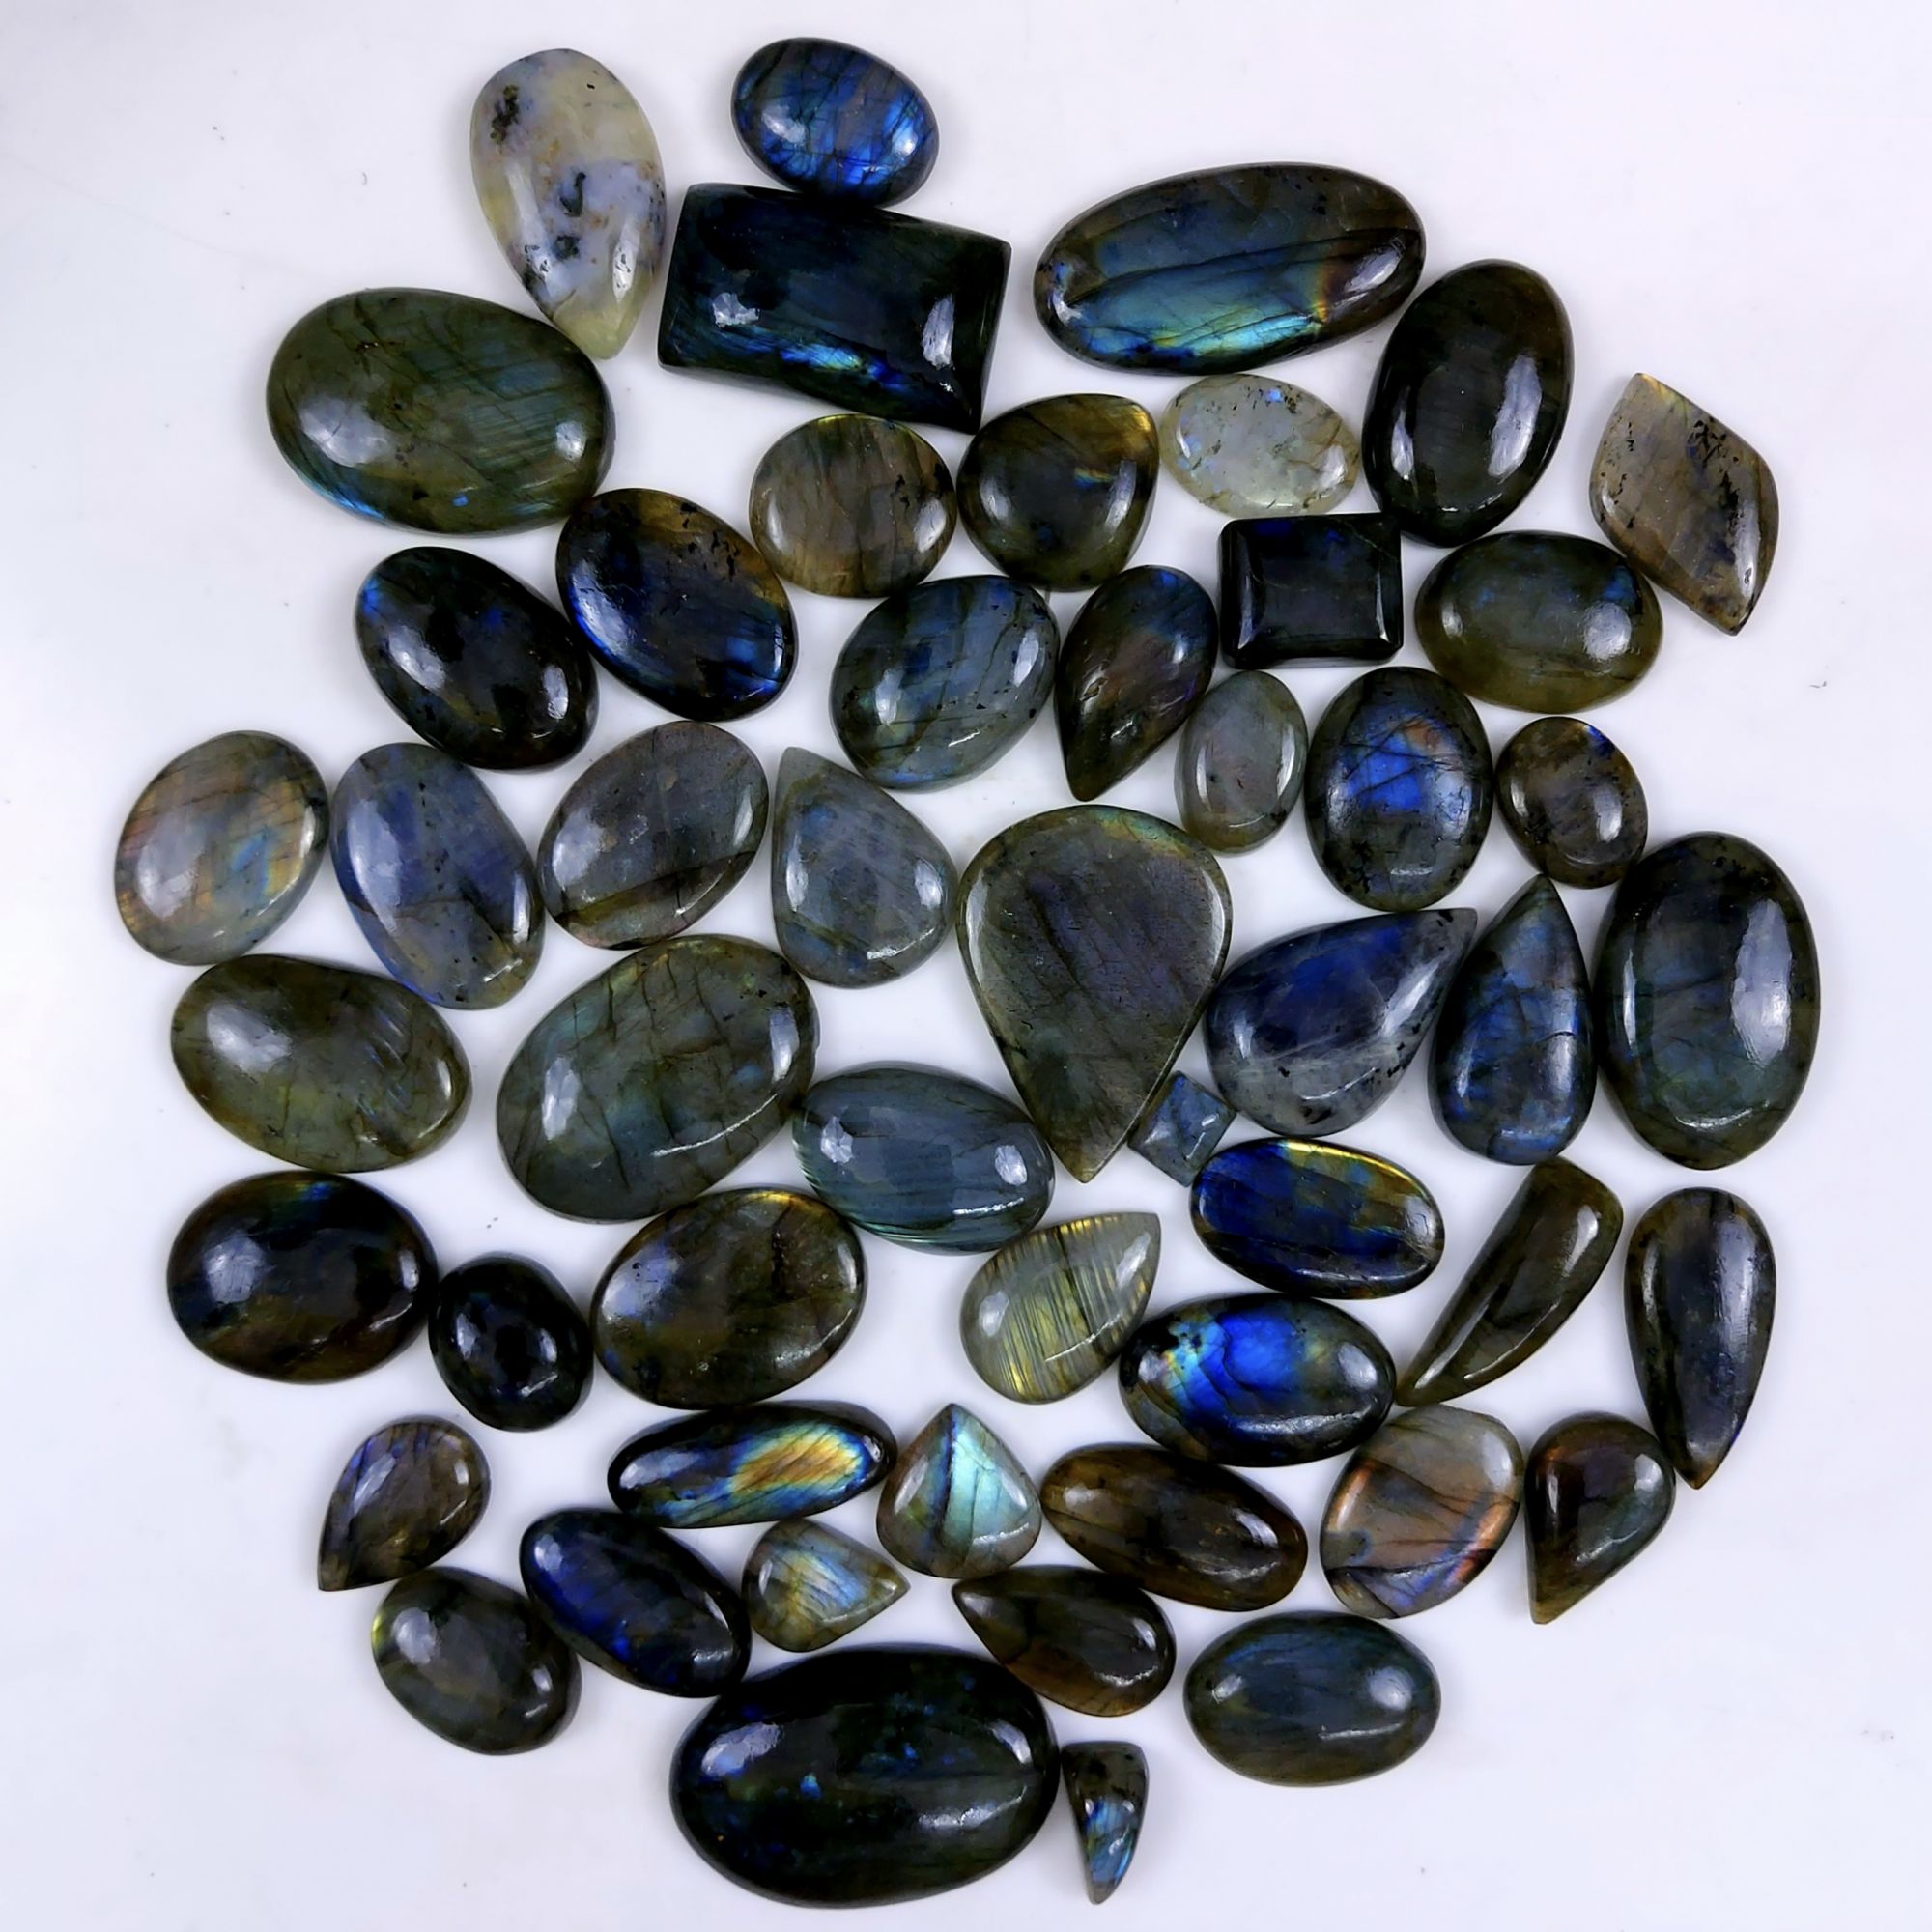 52pc 1665Cts Labradorite Cabochon Multifire Healing Crystal For Jewelry Supplies, Labradorite Necklace Handmade Wire Wrapped Gemstone Pendant 40x25 20x15mm#6369